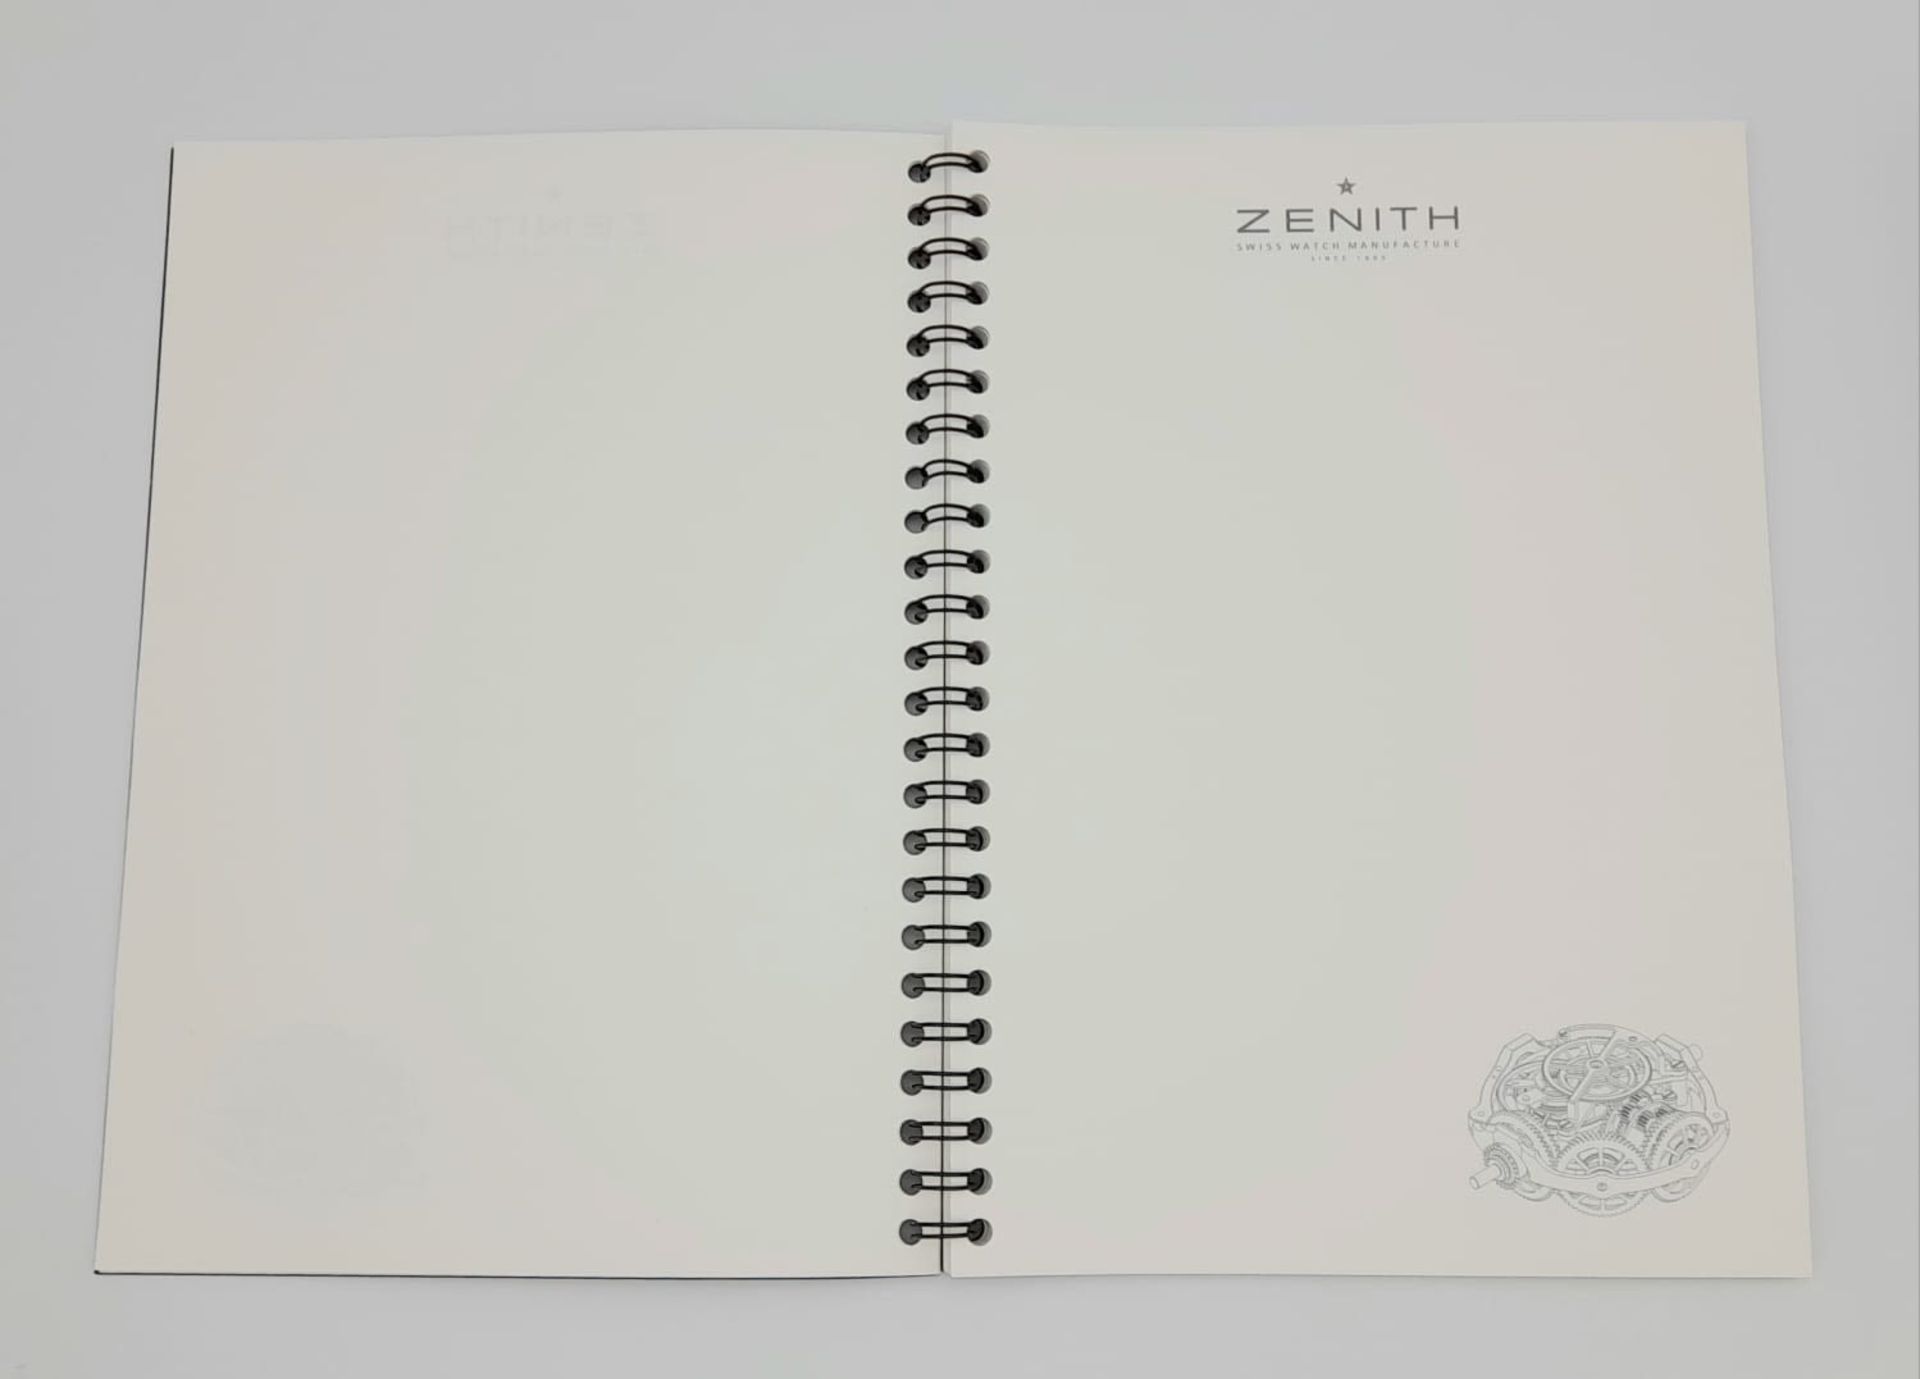 COLLECTION OF 2X ZENITH WATCH COMPANY NOTEBOOKS WITH A ZENITH BOOKMARK - Image 16 of 16